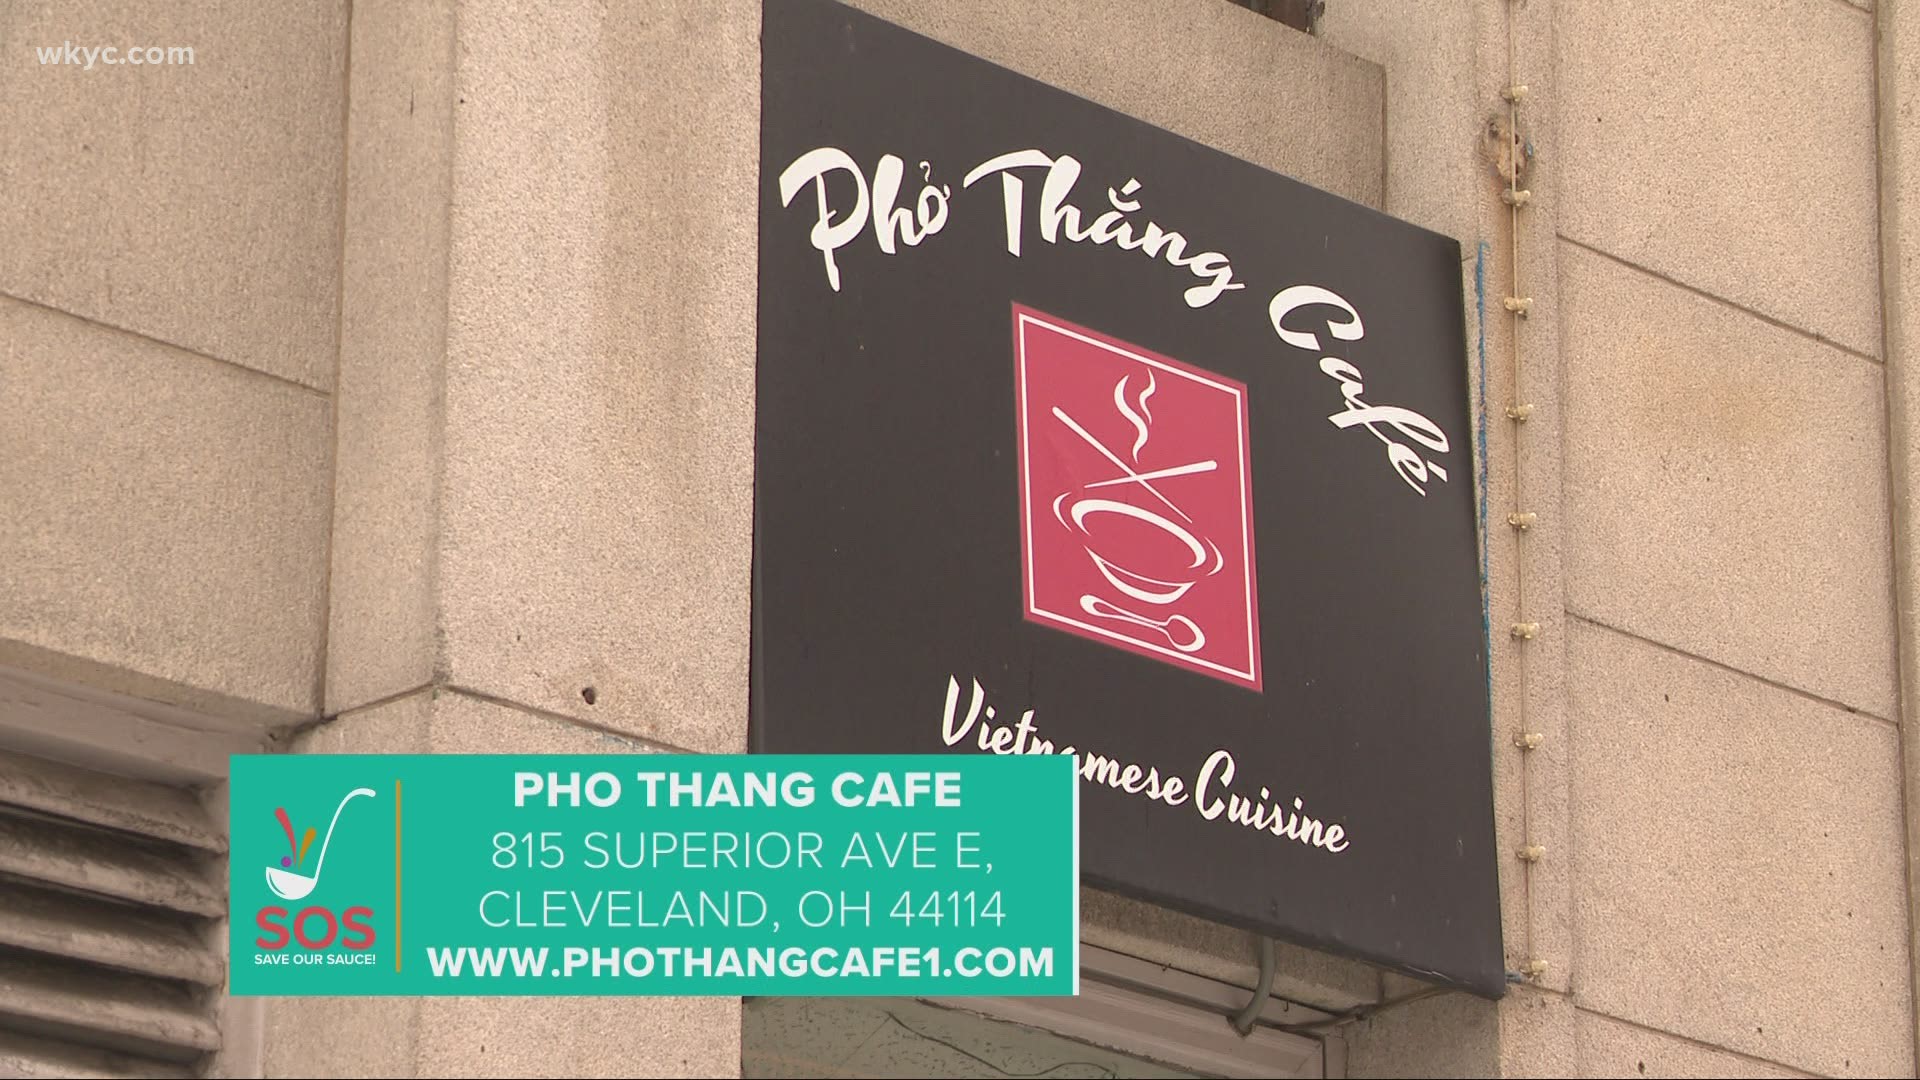 February 25, 2021: Today we shine the spotlight on Pho Thang Cafe in downtown Cleveland for the 'Save our Sauce' campaign to support restaurants amid the pandemic.